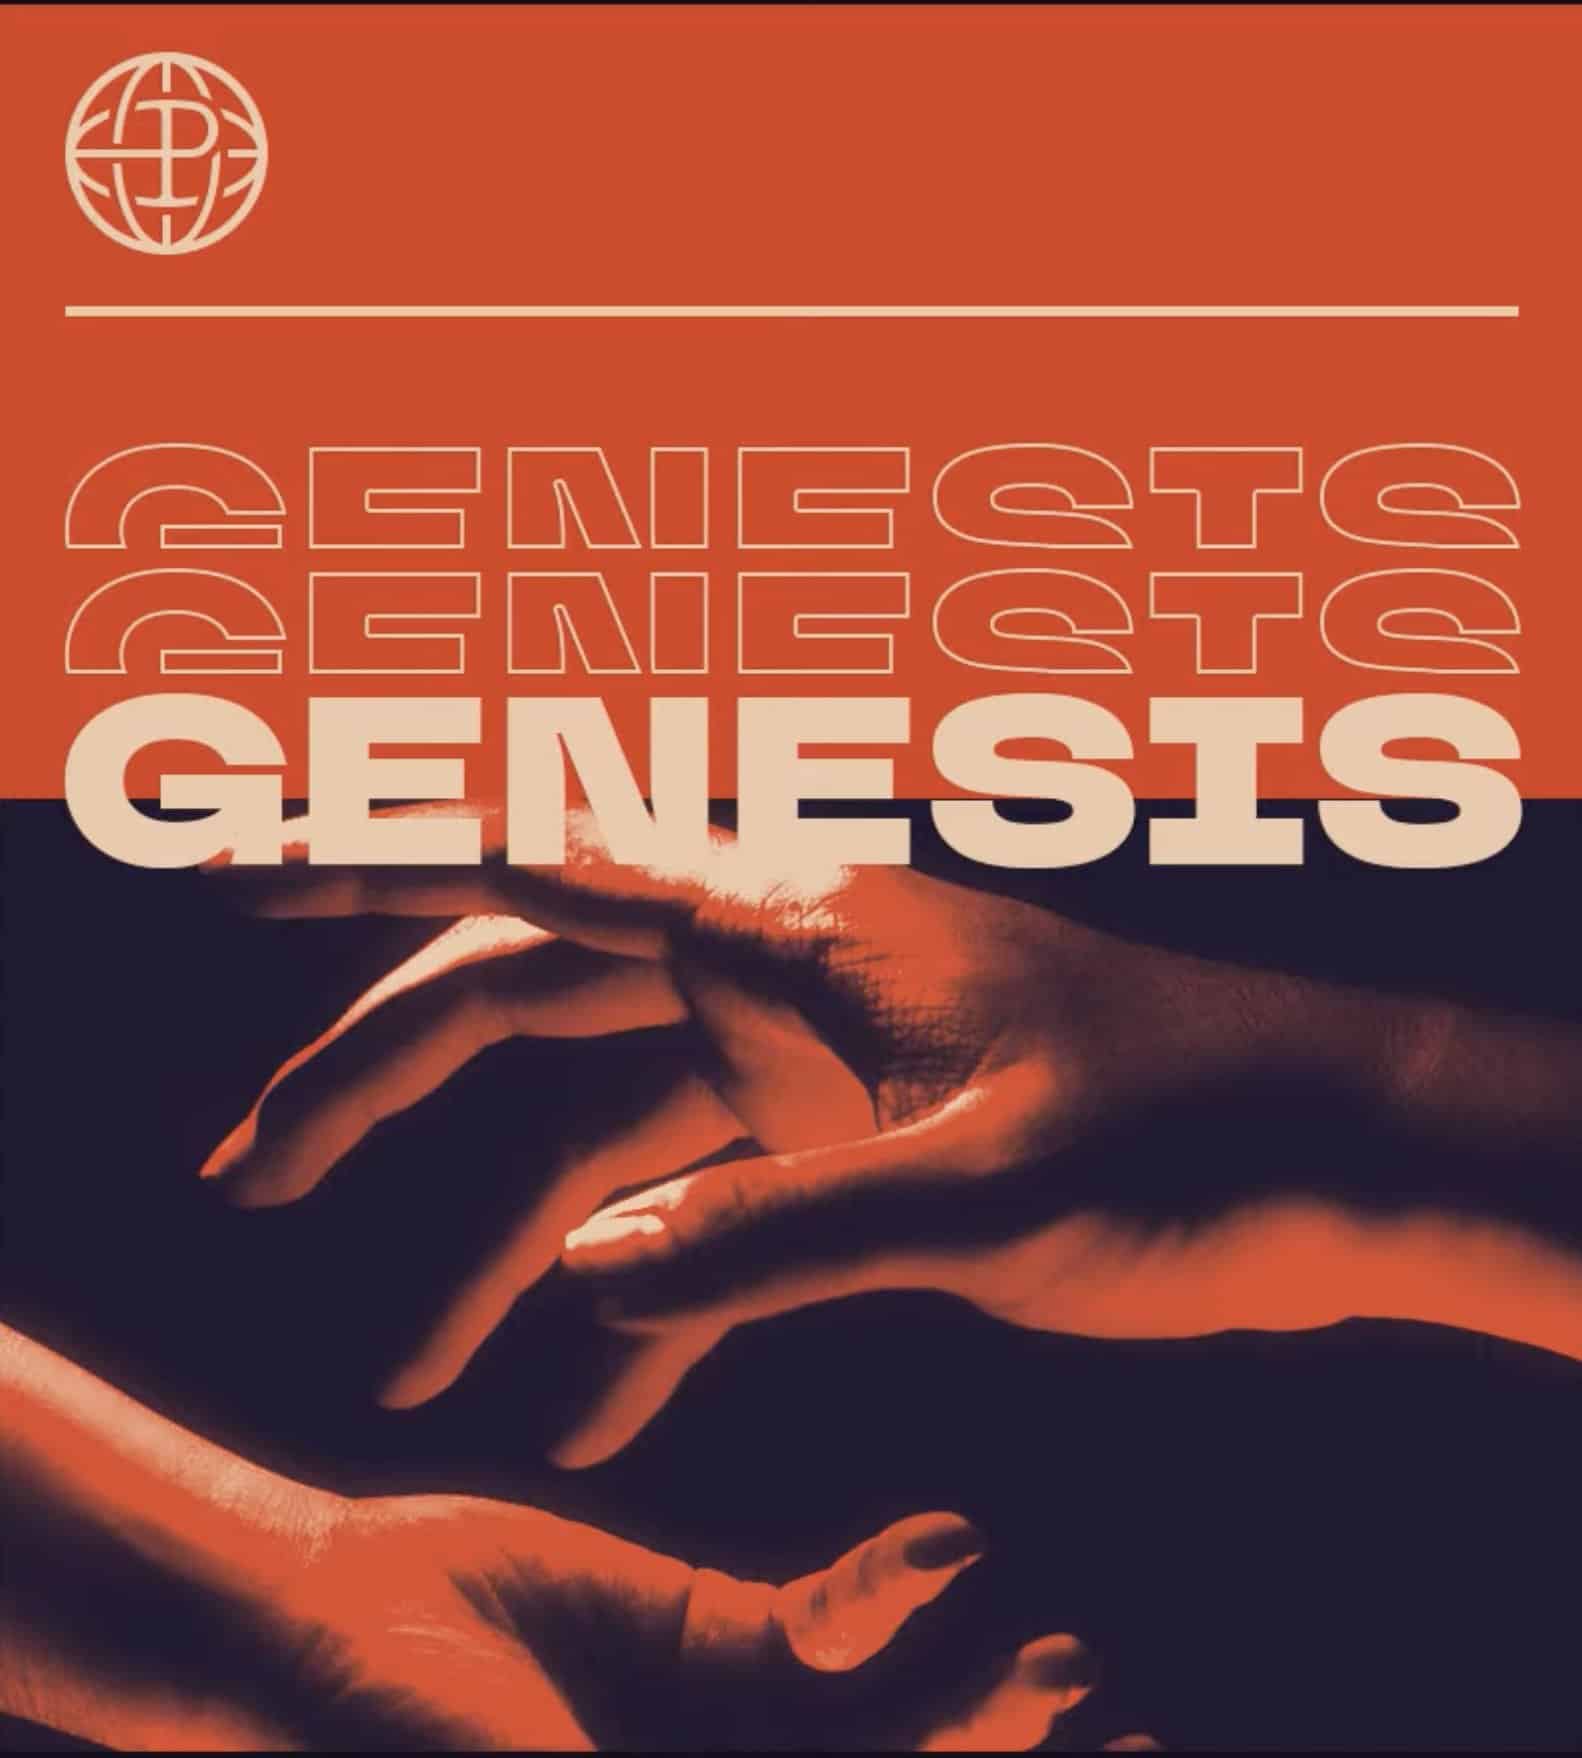 Two hands are reached with the word 'Genesis' repeated above